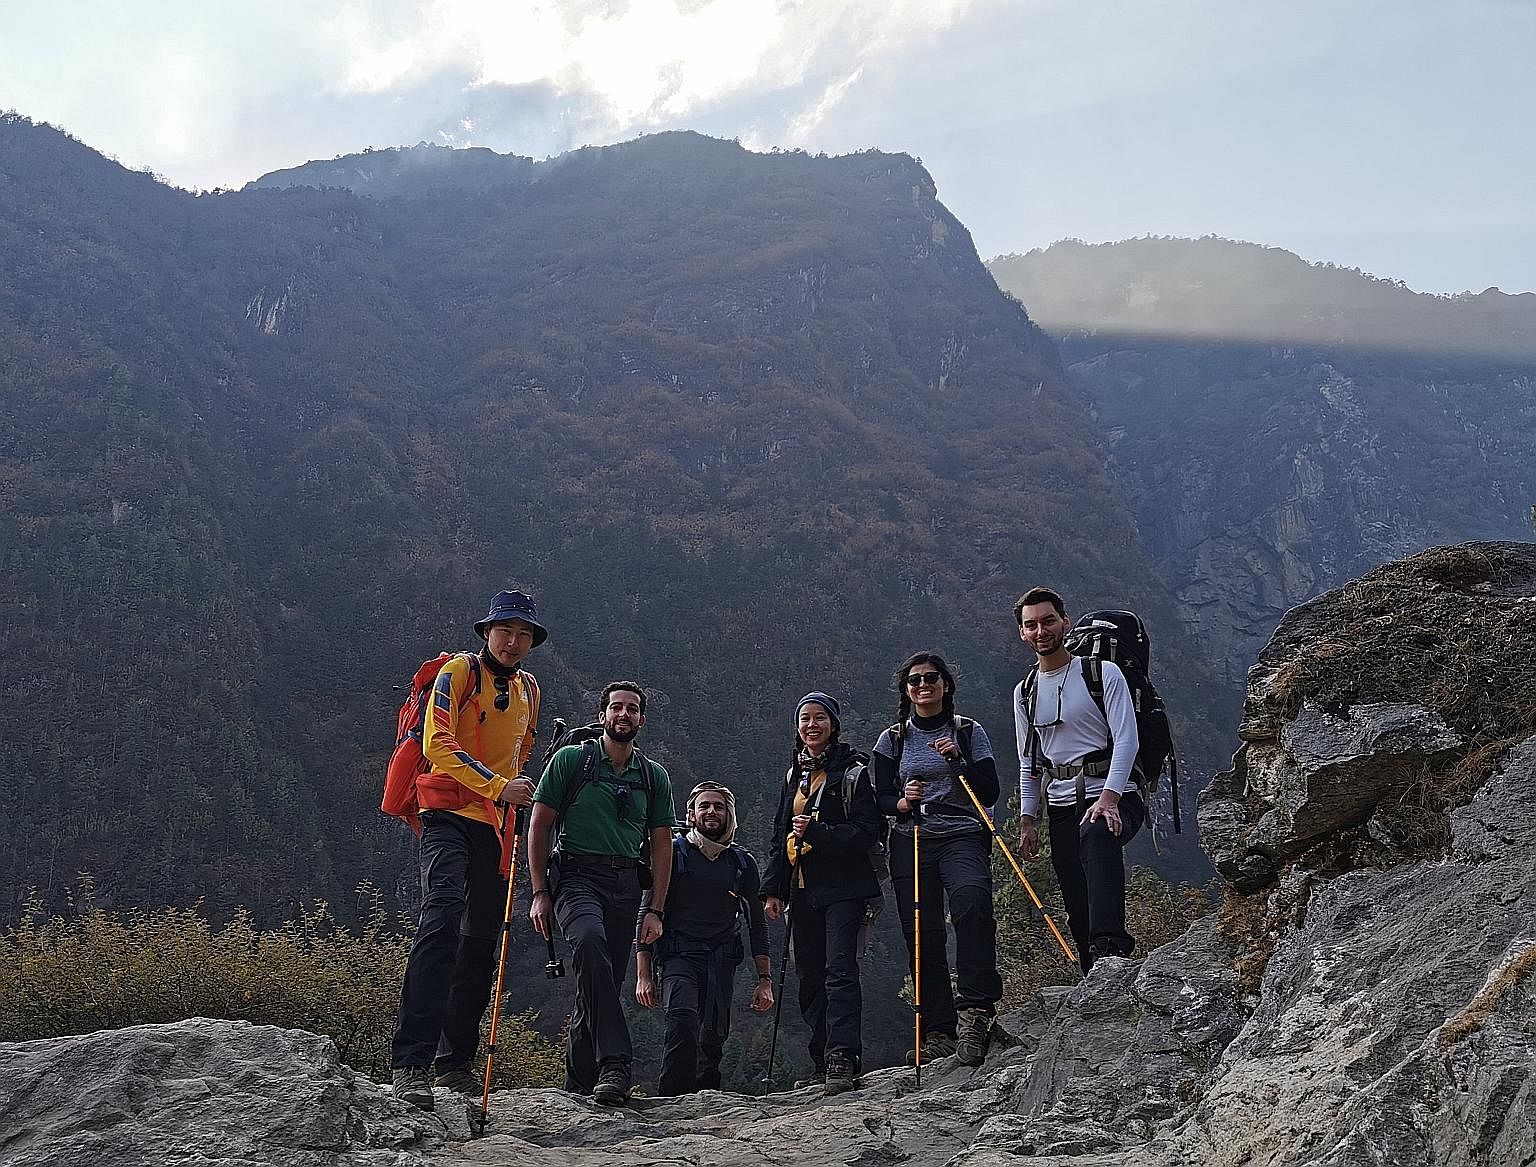 (From left) Mr Mcrid Wang, Mr Enrico Viora, Mr Alhasan Alkaff, Ms Napath Lertpinyopast, Ms Soyena Dhakal and Mr Xavier Janssen on day two of their trek last month to the Mount Everest base camp.